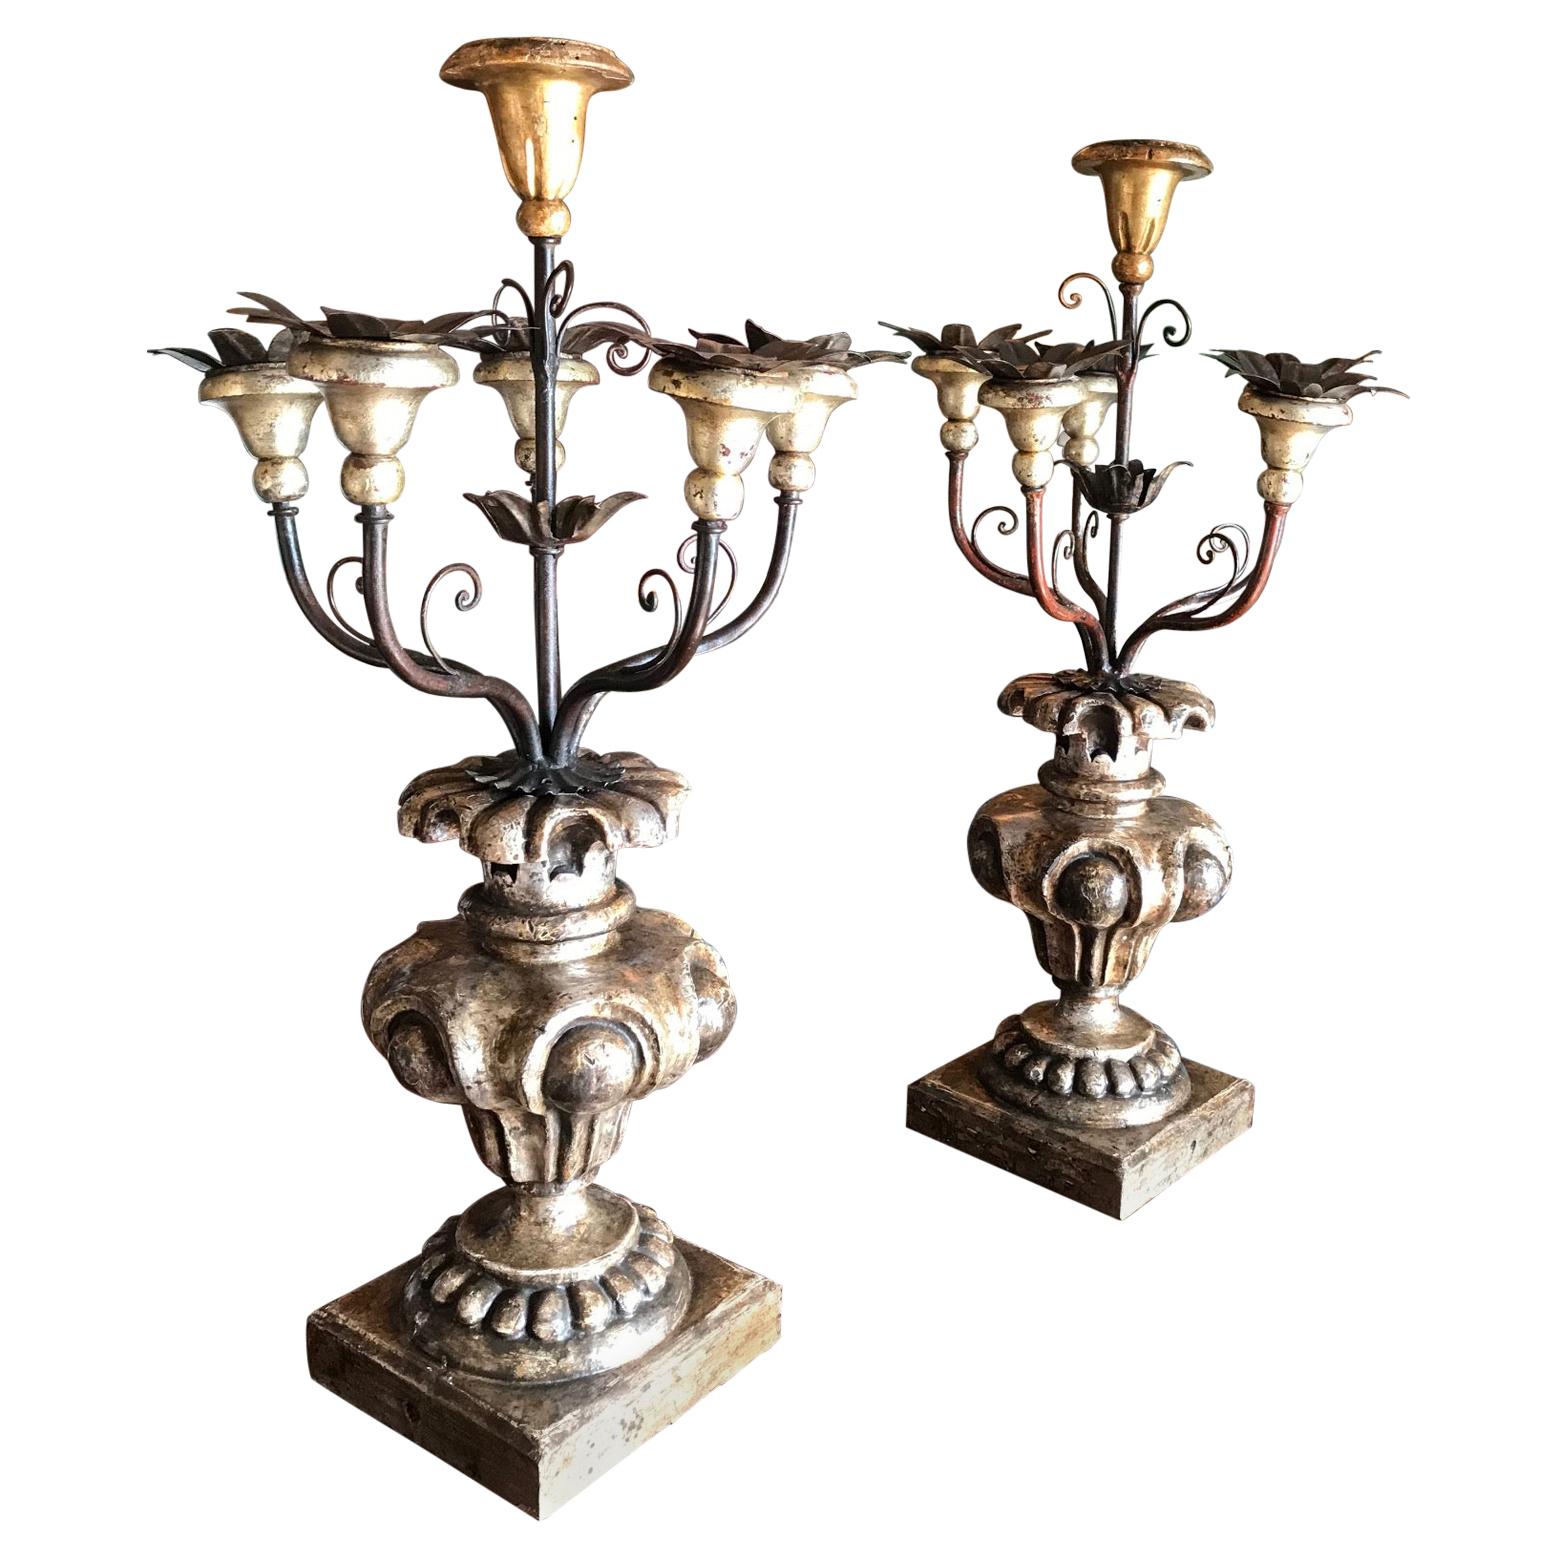 18th Century Wooden & Metal Light Candelabra Antique Gift Object Accent LA, Pair